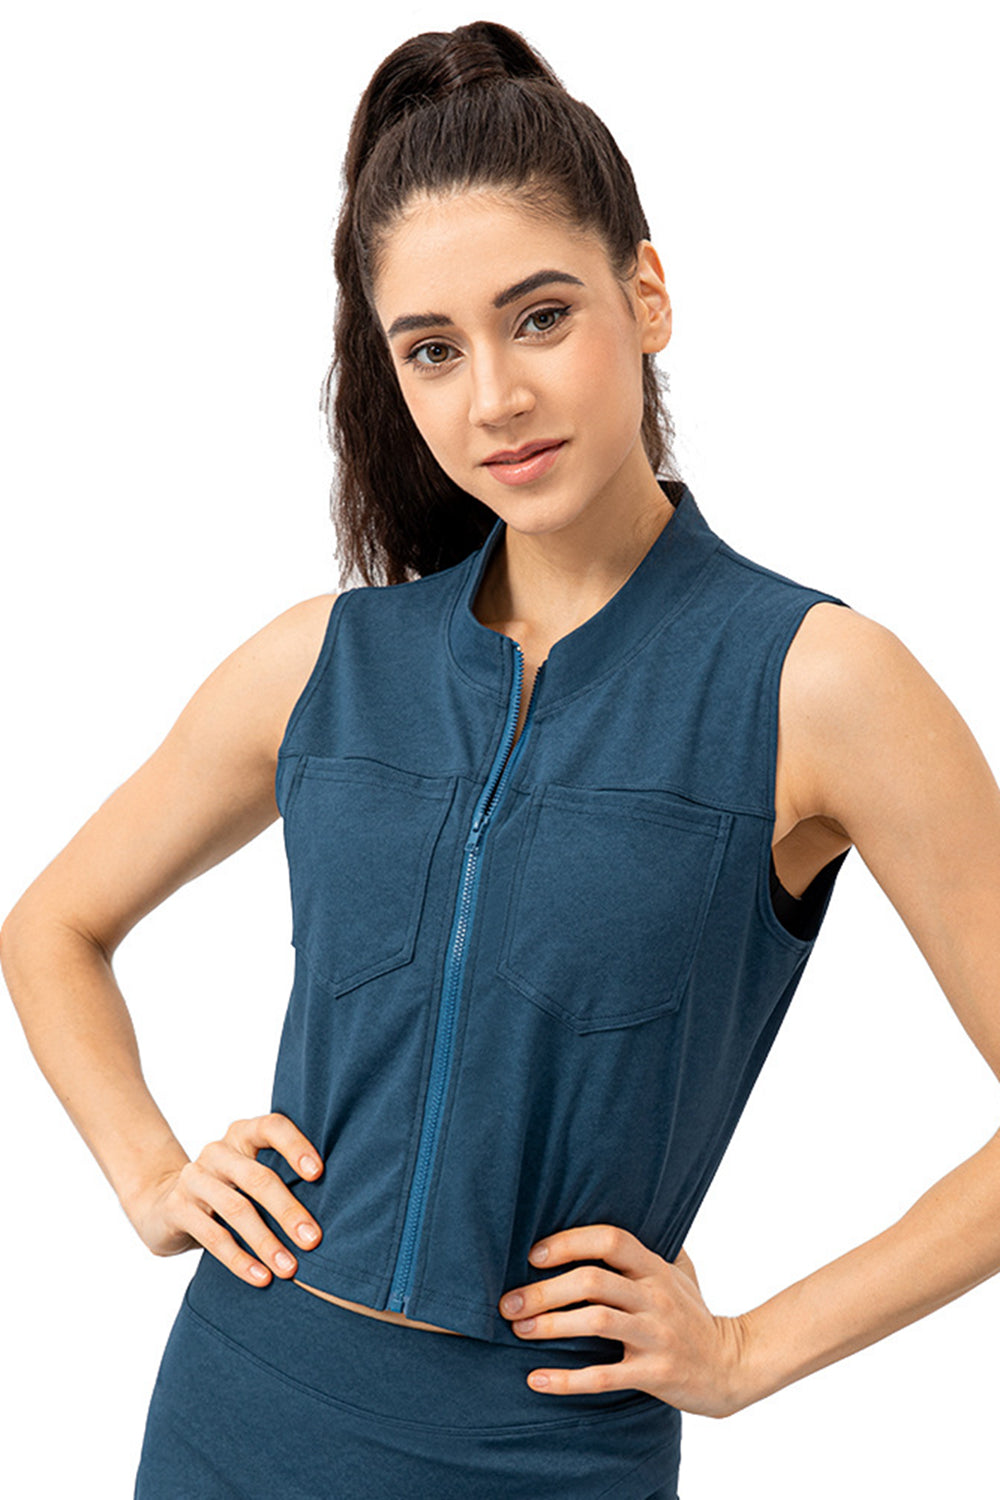 Super Stretch Zip Up Sports Vest with Breast Pockets